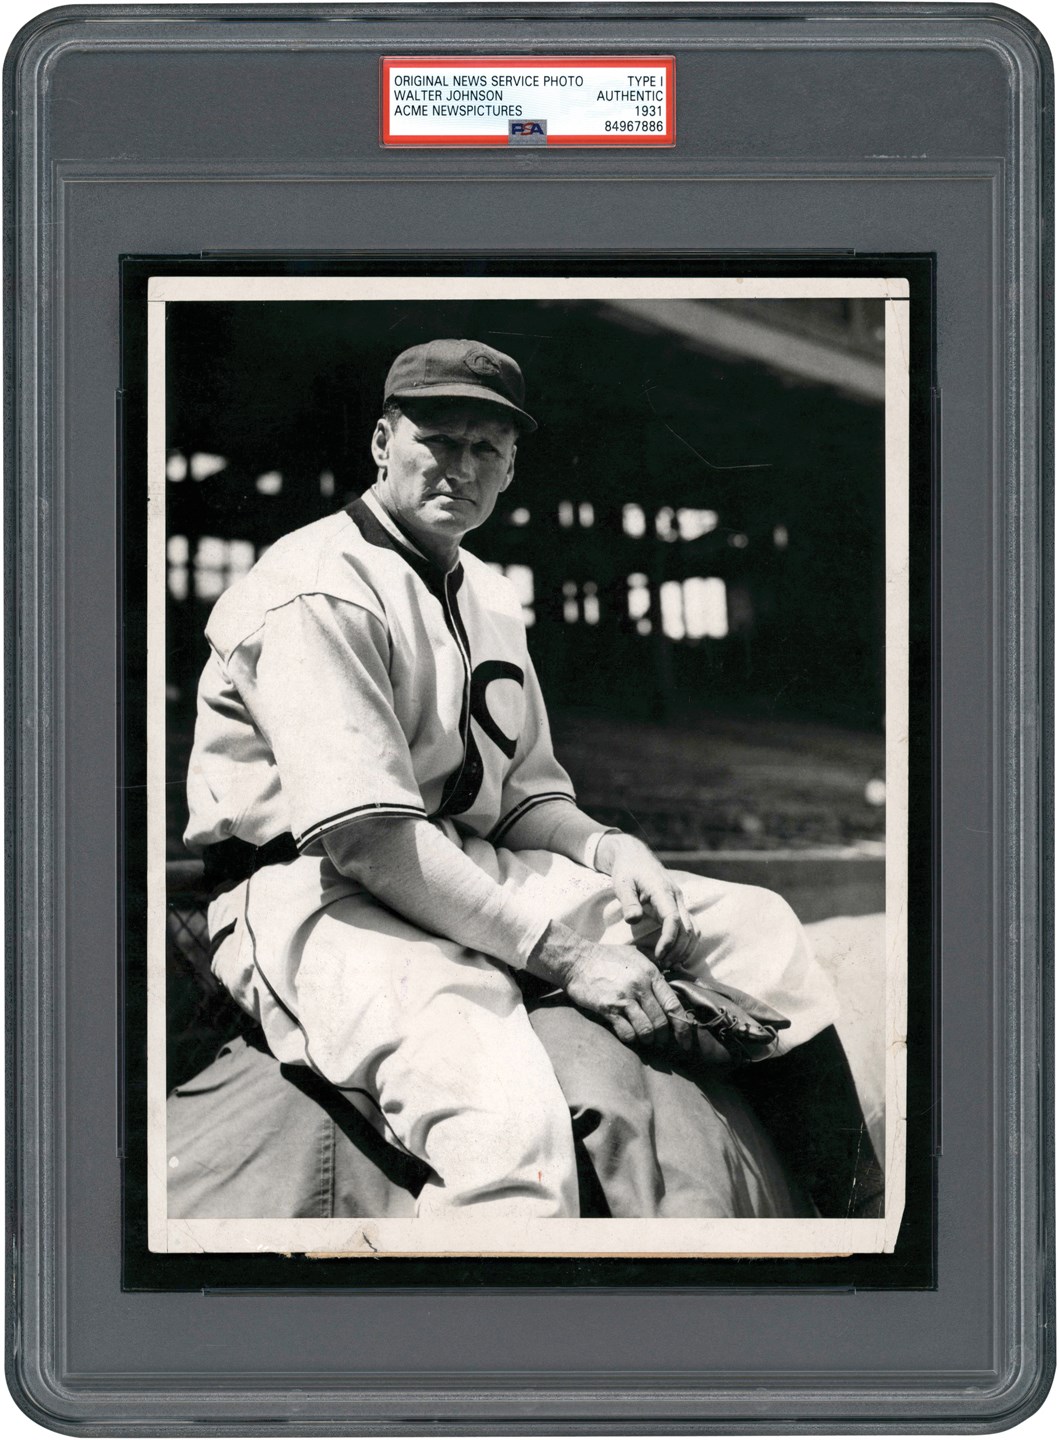 Vintage Sports Photographs - 1933 Walter Johnson First Game as Cleveland Indians Manager Photograph (PSA Type I)